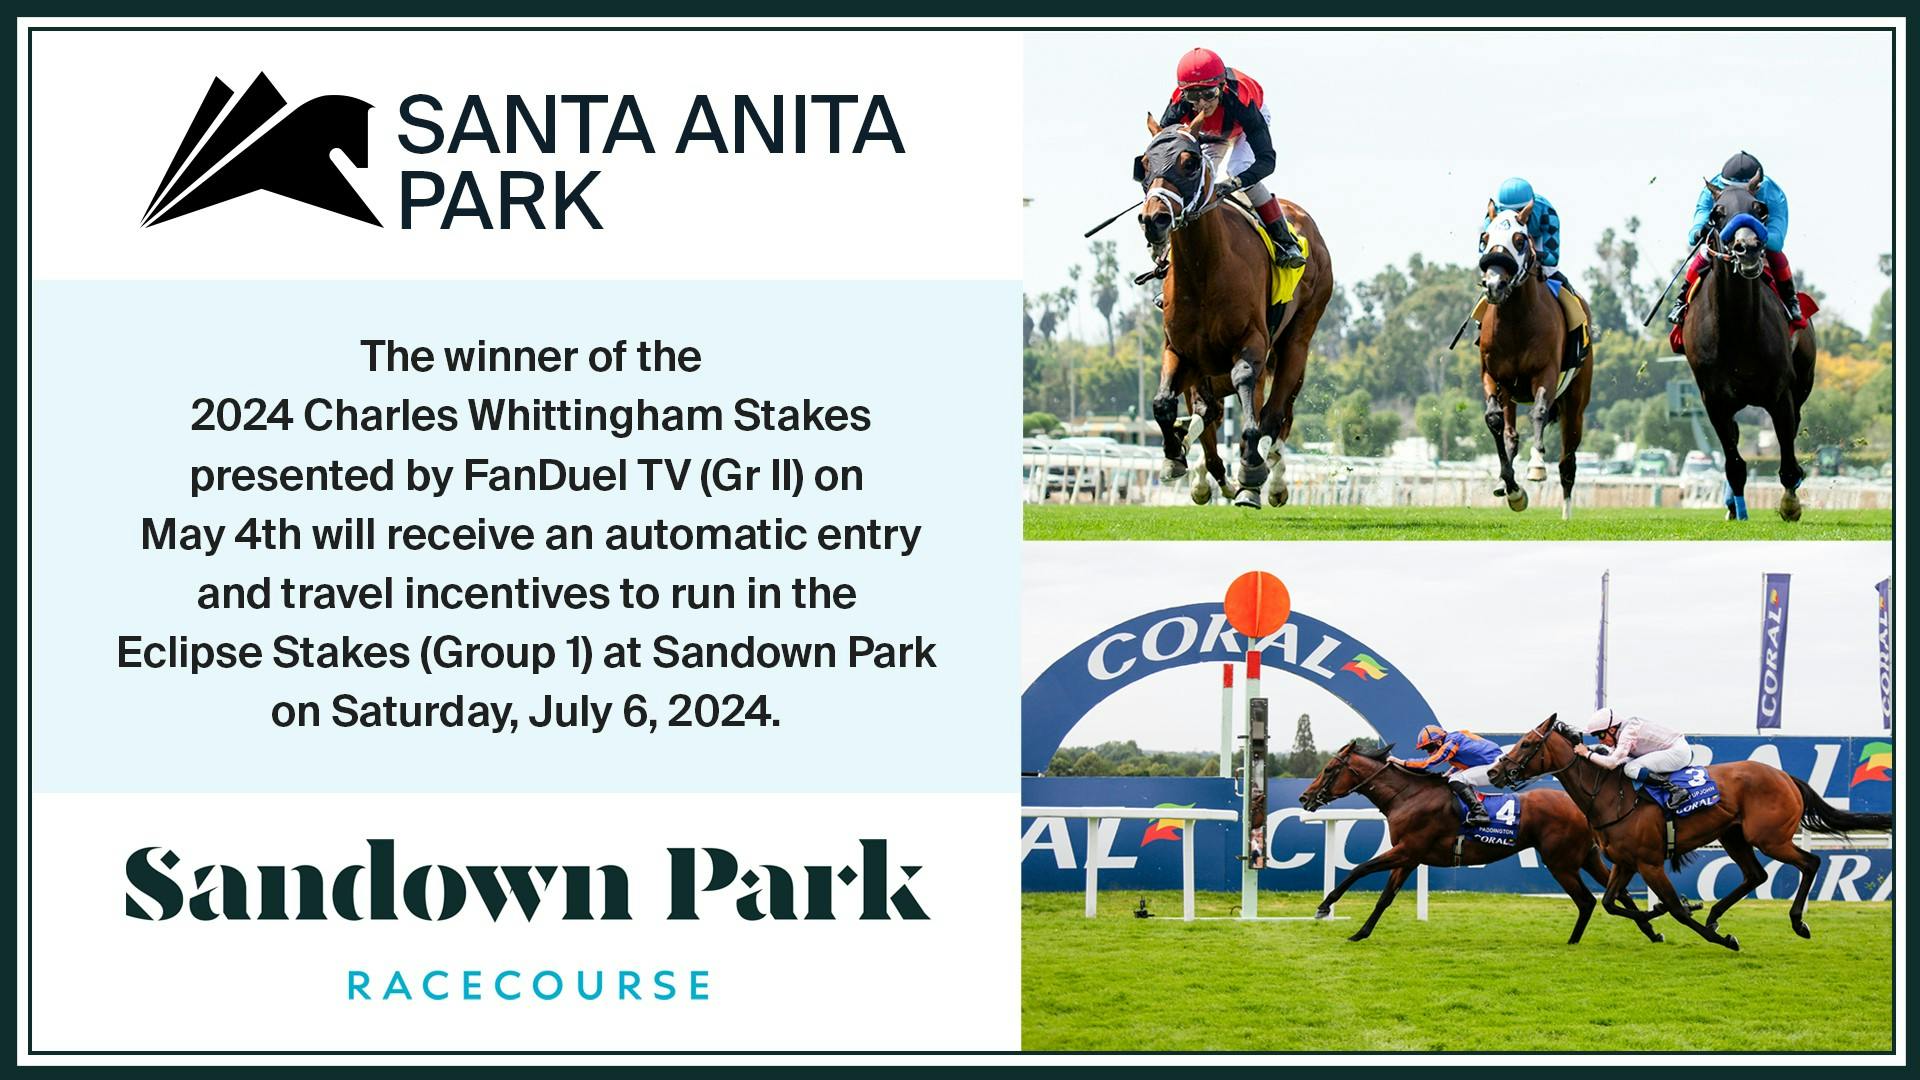 Winner Of Santa Anita’s GII Charles Whittingham Stakes Presented by FanDuel TV May 4 Will Receive Automatic Entry, Travel Incentive For England’s Historic GI Coral-Eclipse Stakes At Sandown Park July 6